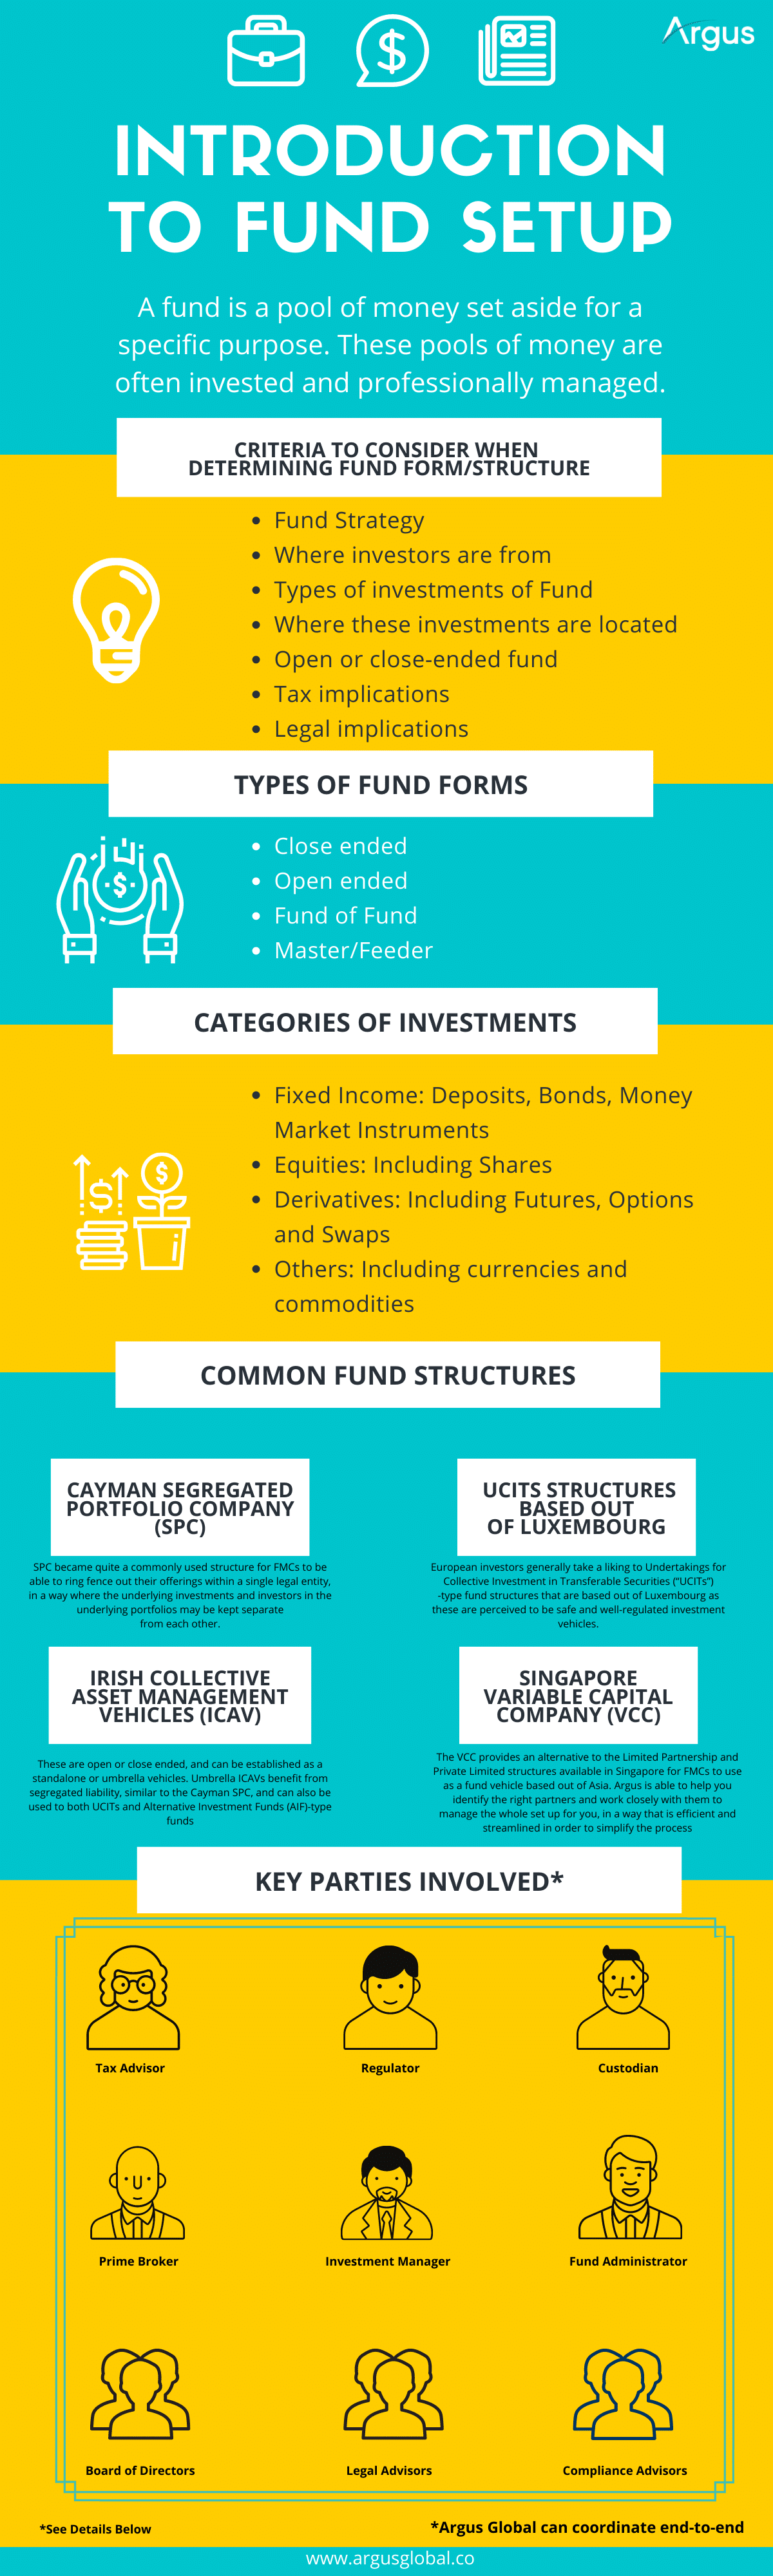 Introduction to Fund Setup in Singapore